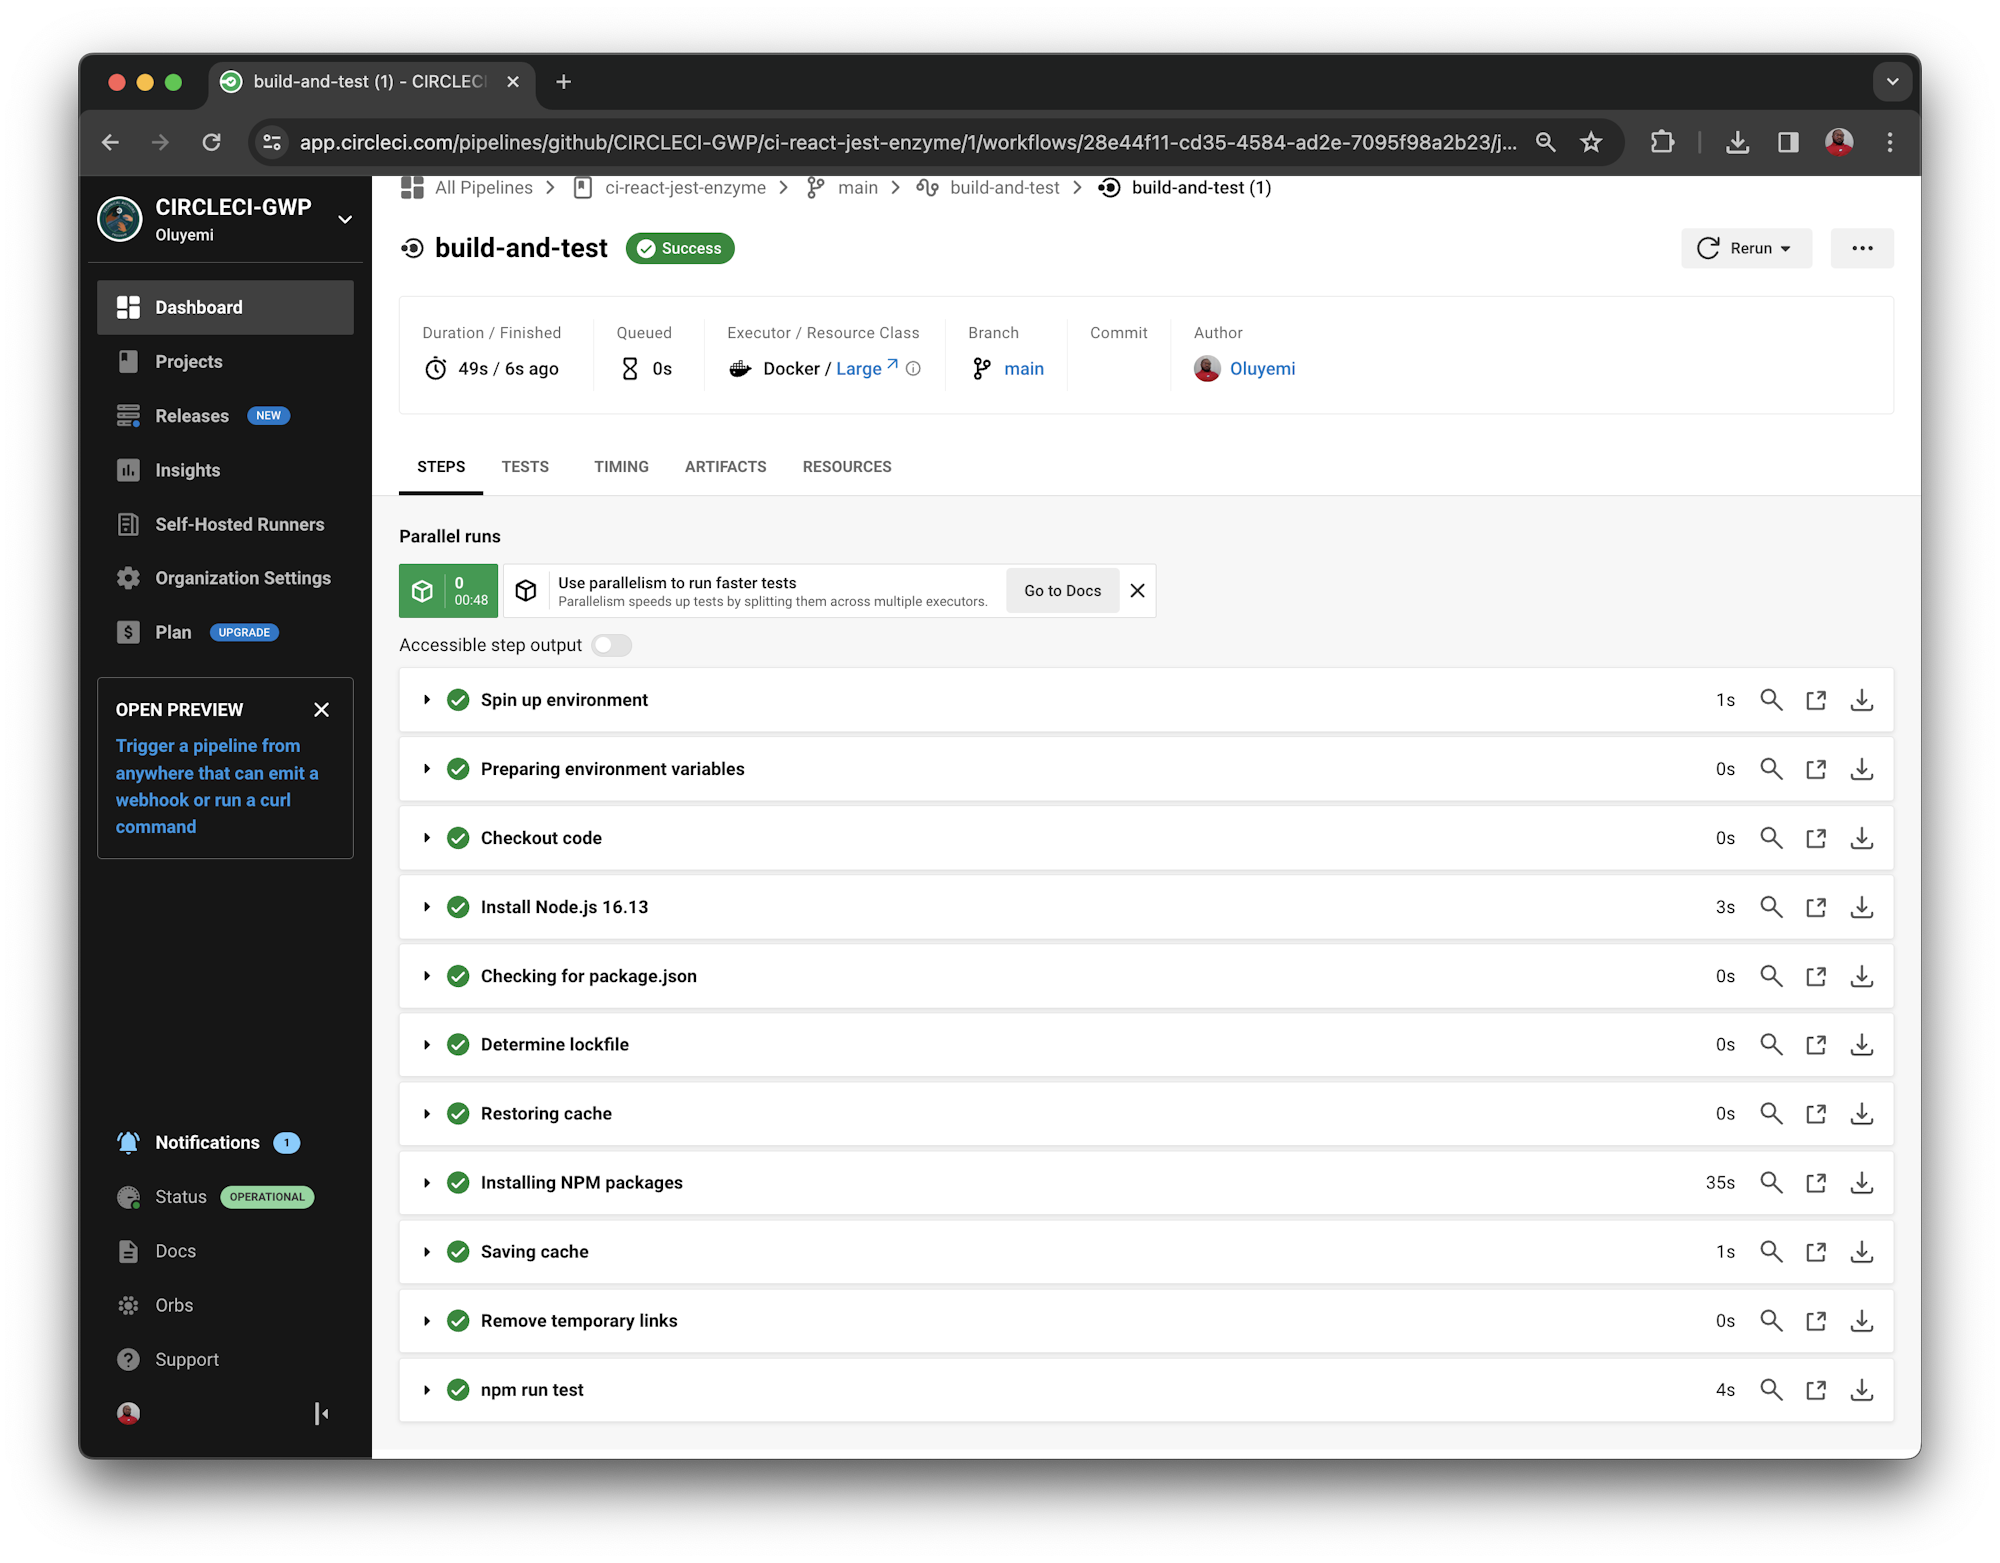 All steps view in CircleCI